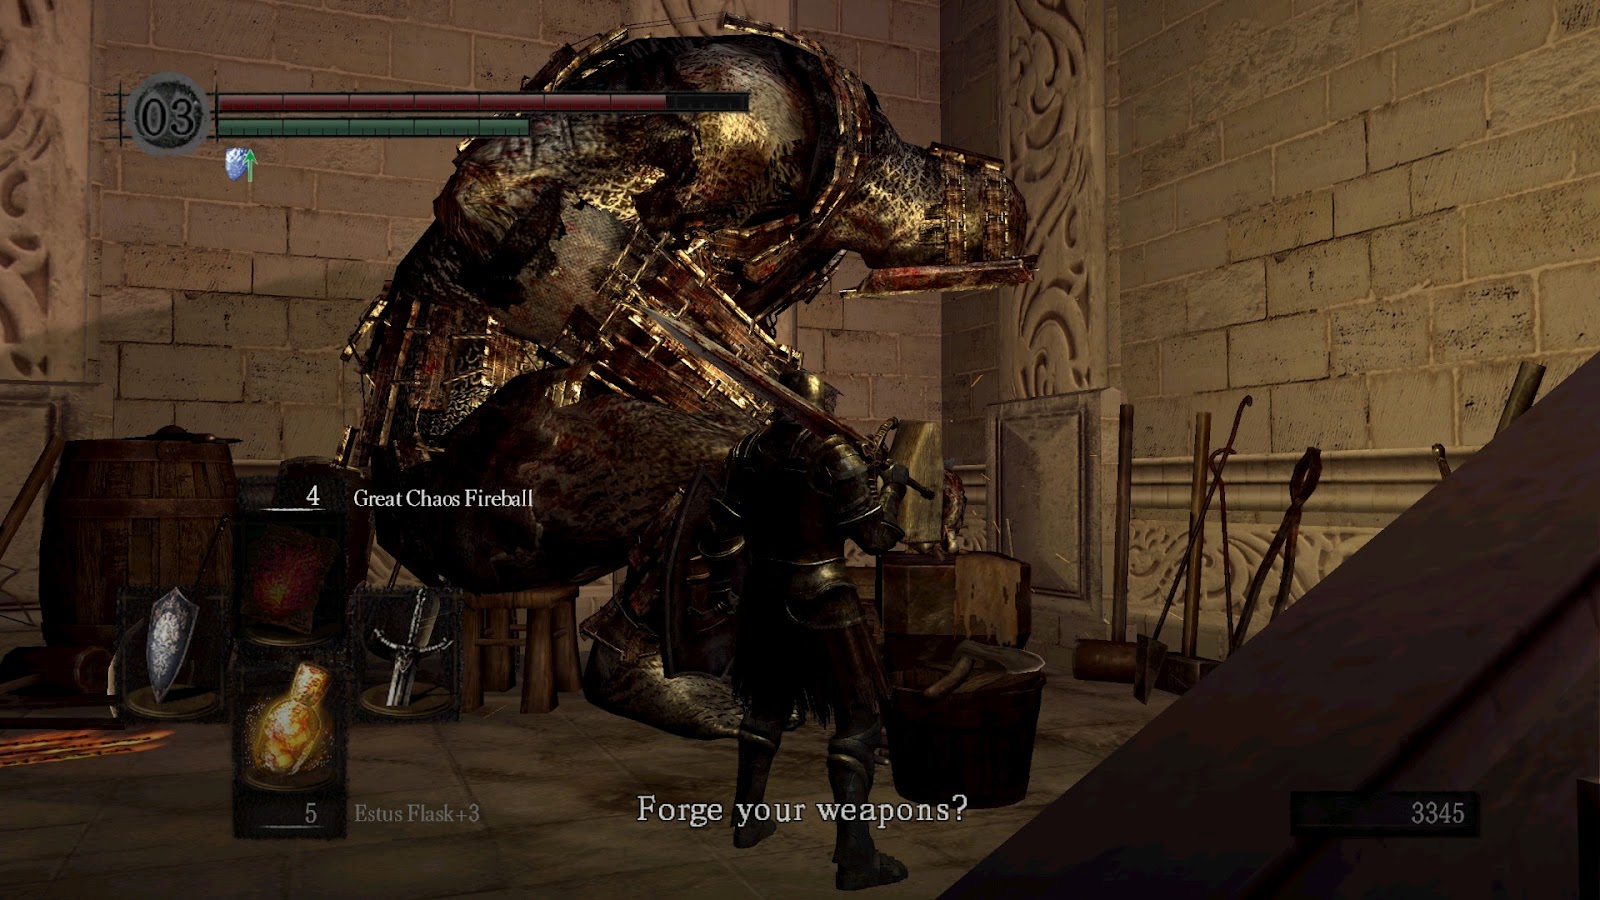 The Dark Souls Ii Lore Thread Of Speculations Spoilers And Headaches Neogaf